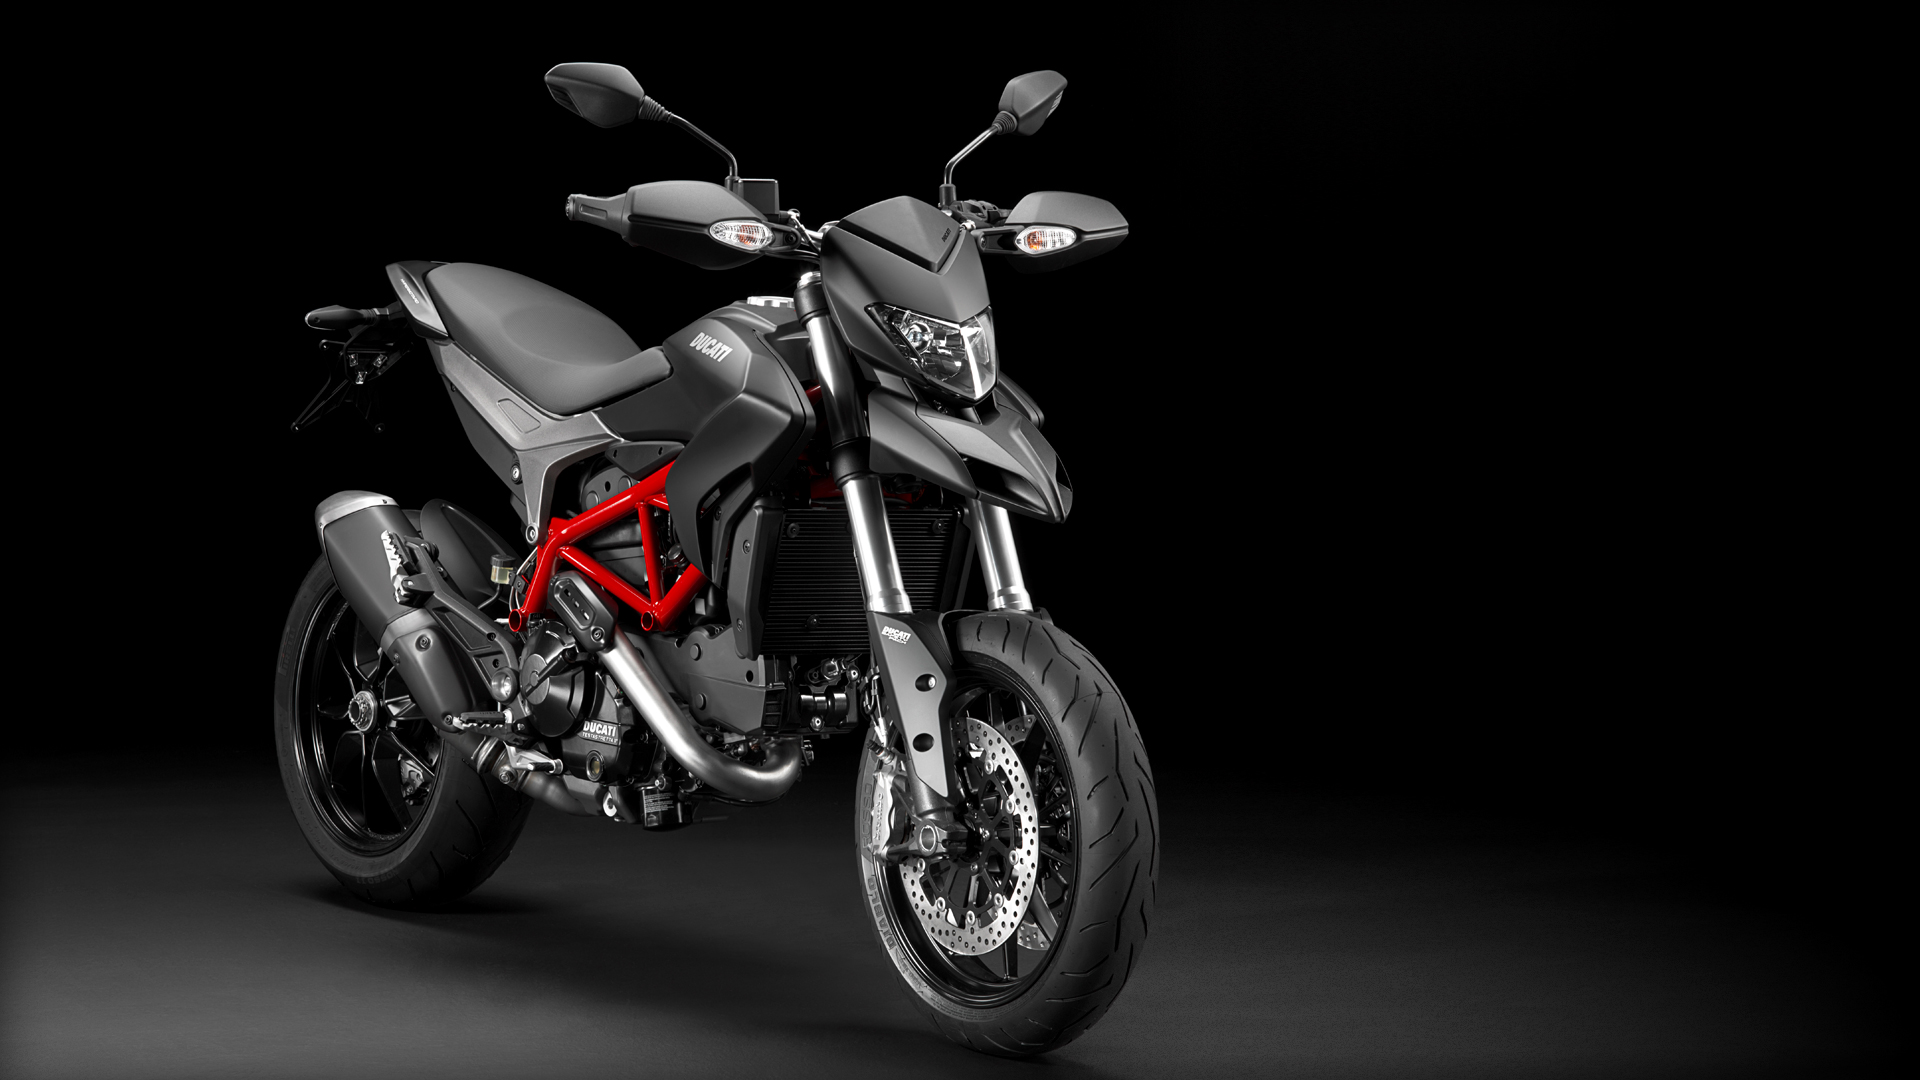 Hypermotard_2013_Studio_MB_B01_1920x1080.mediagallery_output_image_[1920x1080].png